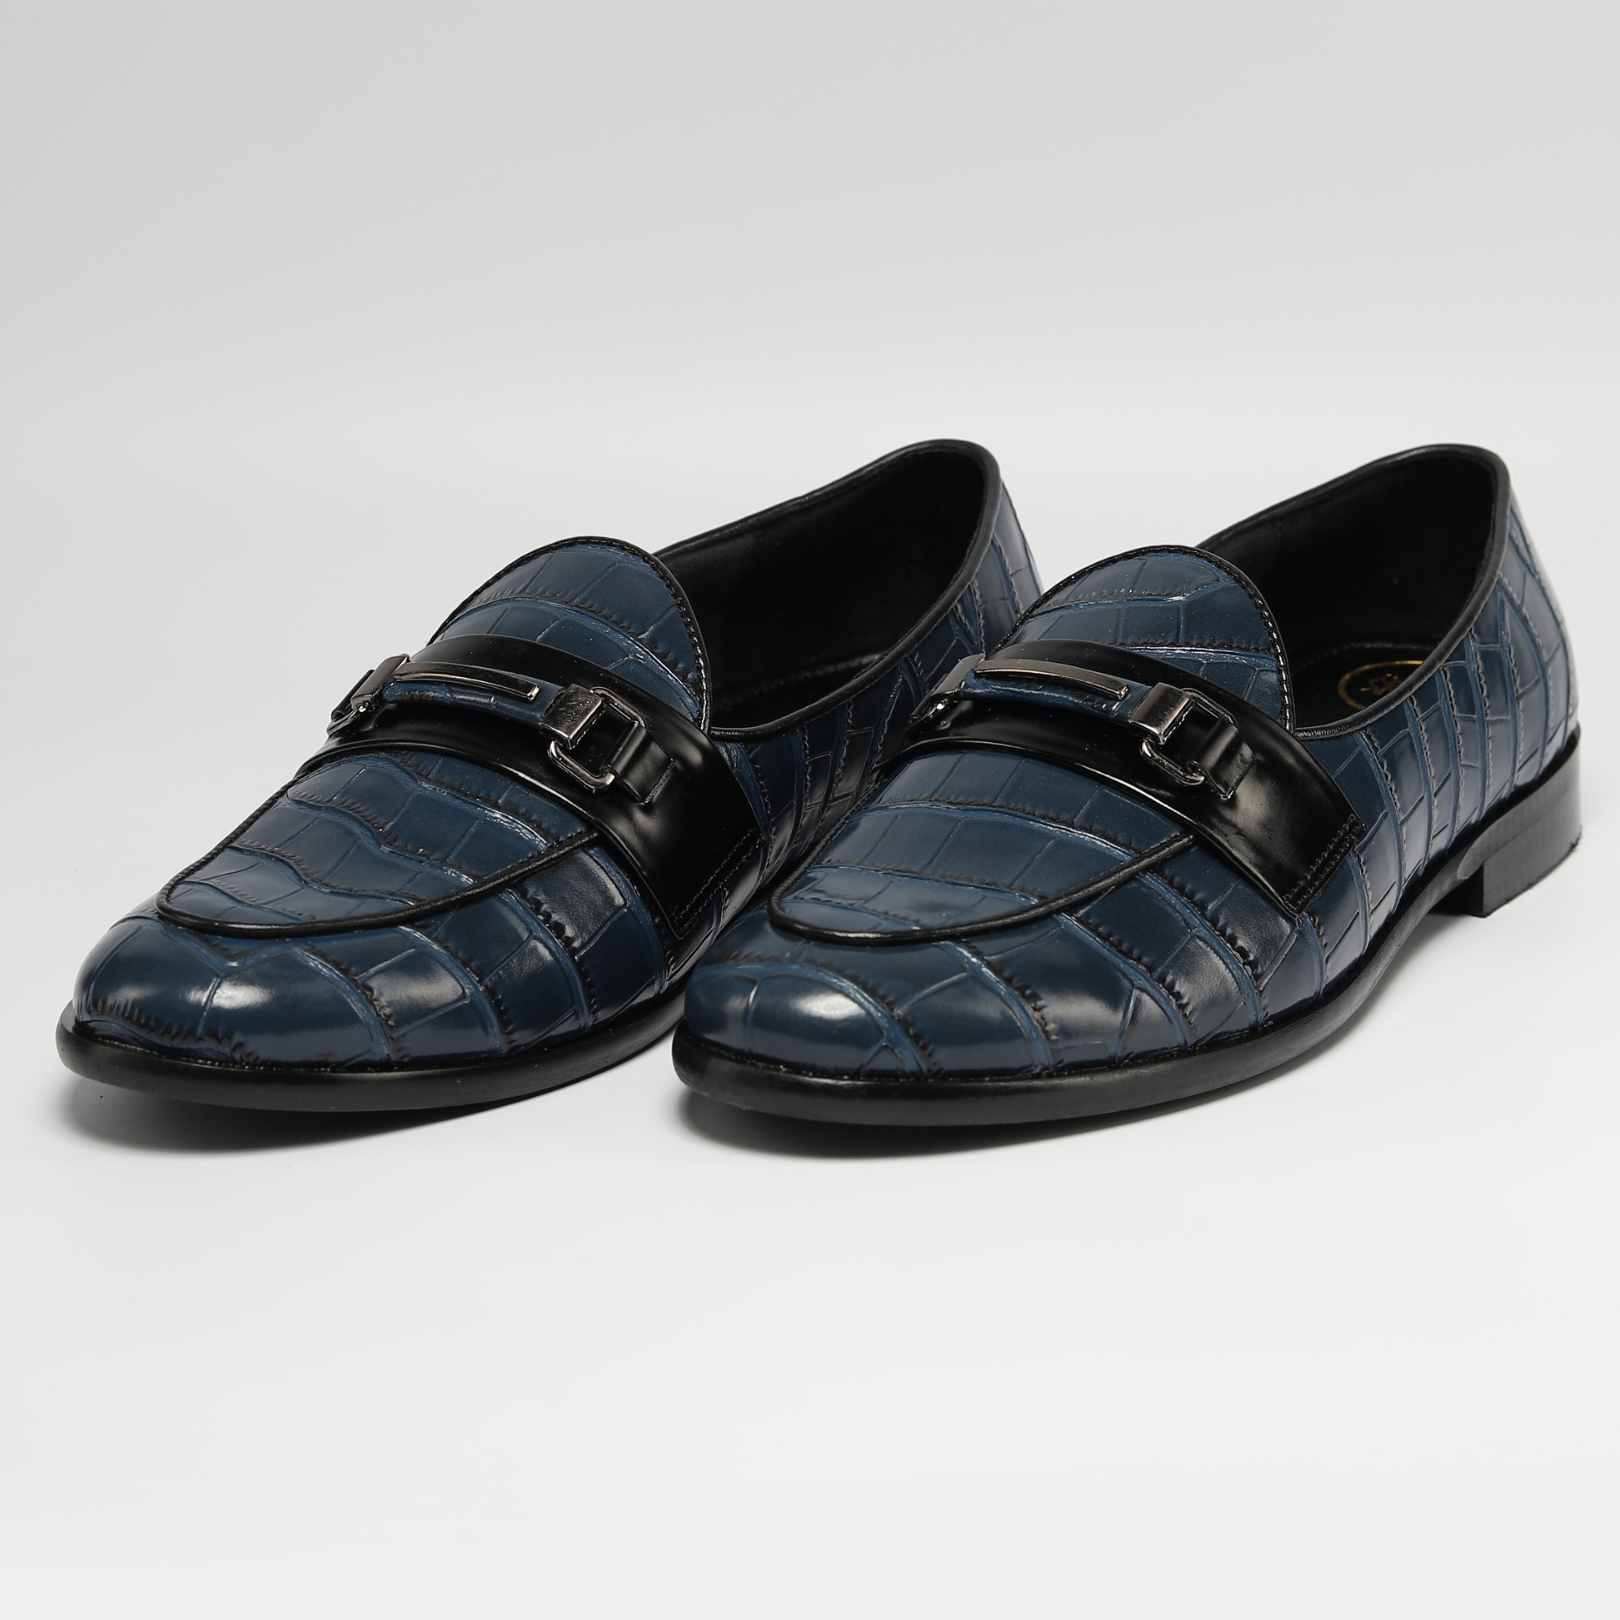 A versatile blue Magnificos Classic Horsebit Slip Ons crocodile print loafer with a black buckle, perfect for those who prefer vegan shoes. (Brand Name: Monkstory)